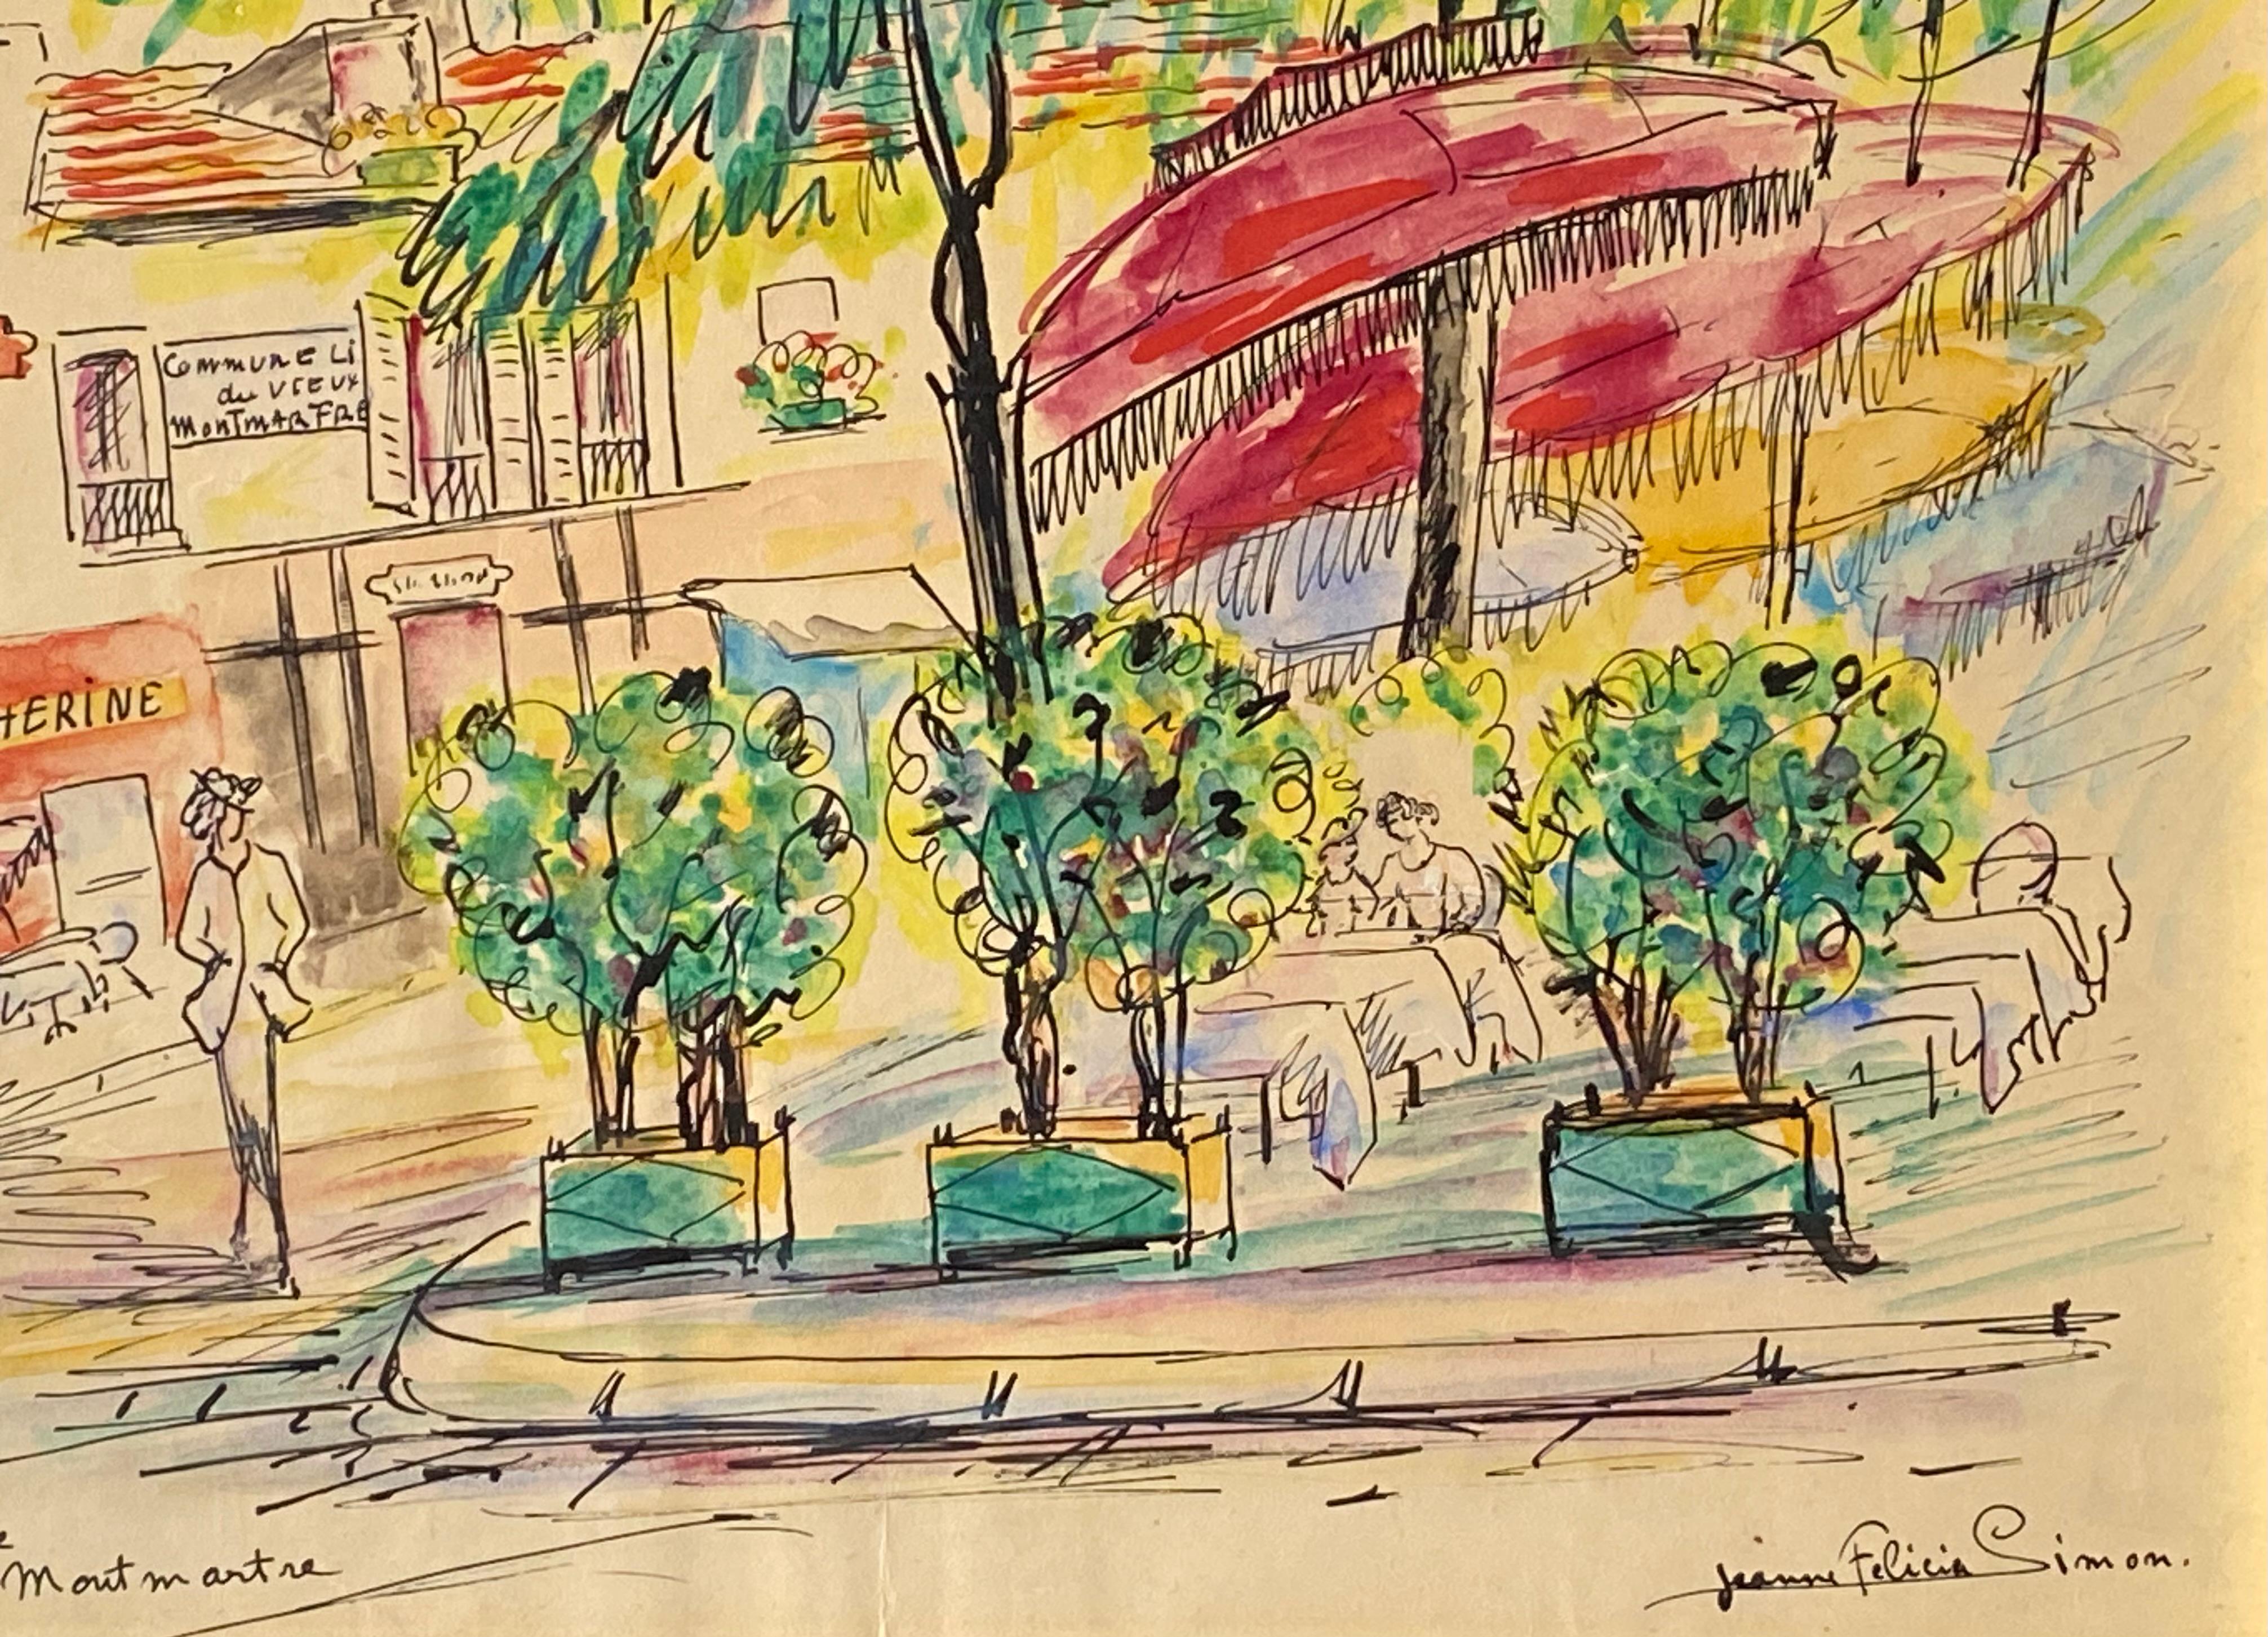 
Original watercolor and ink drawing on paper mounted to heavy cardstock of the Place du Tertre in Montmartre, Paris by the French artist , Jeanne Felicia Simon.  Signed lower right in ink and titled lower left.  Condition is good. Circa 1965. Under